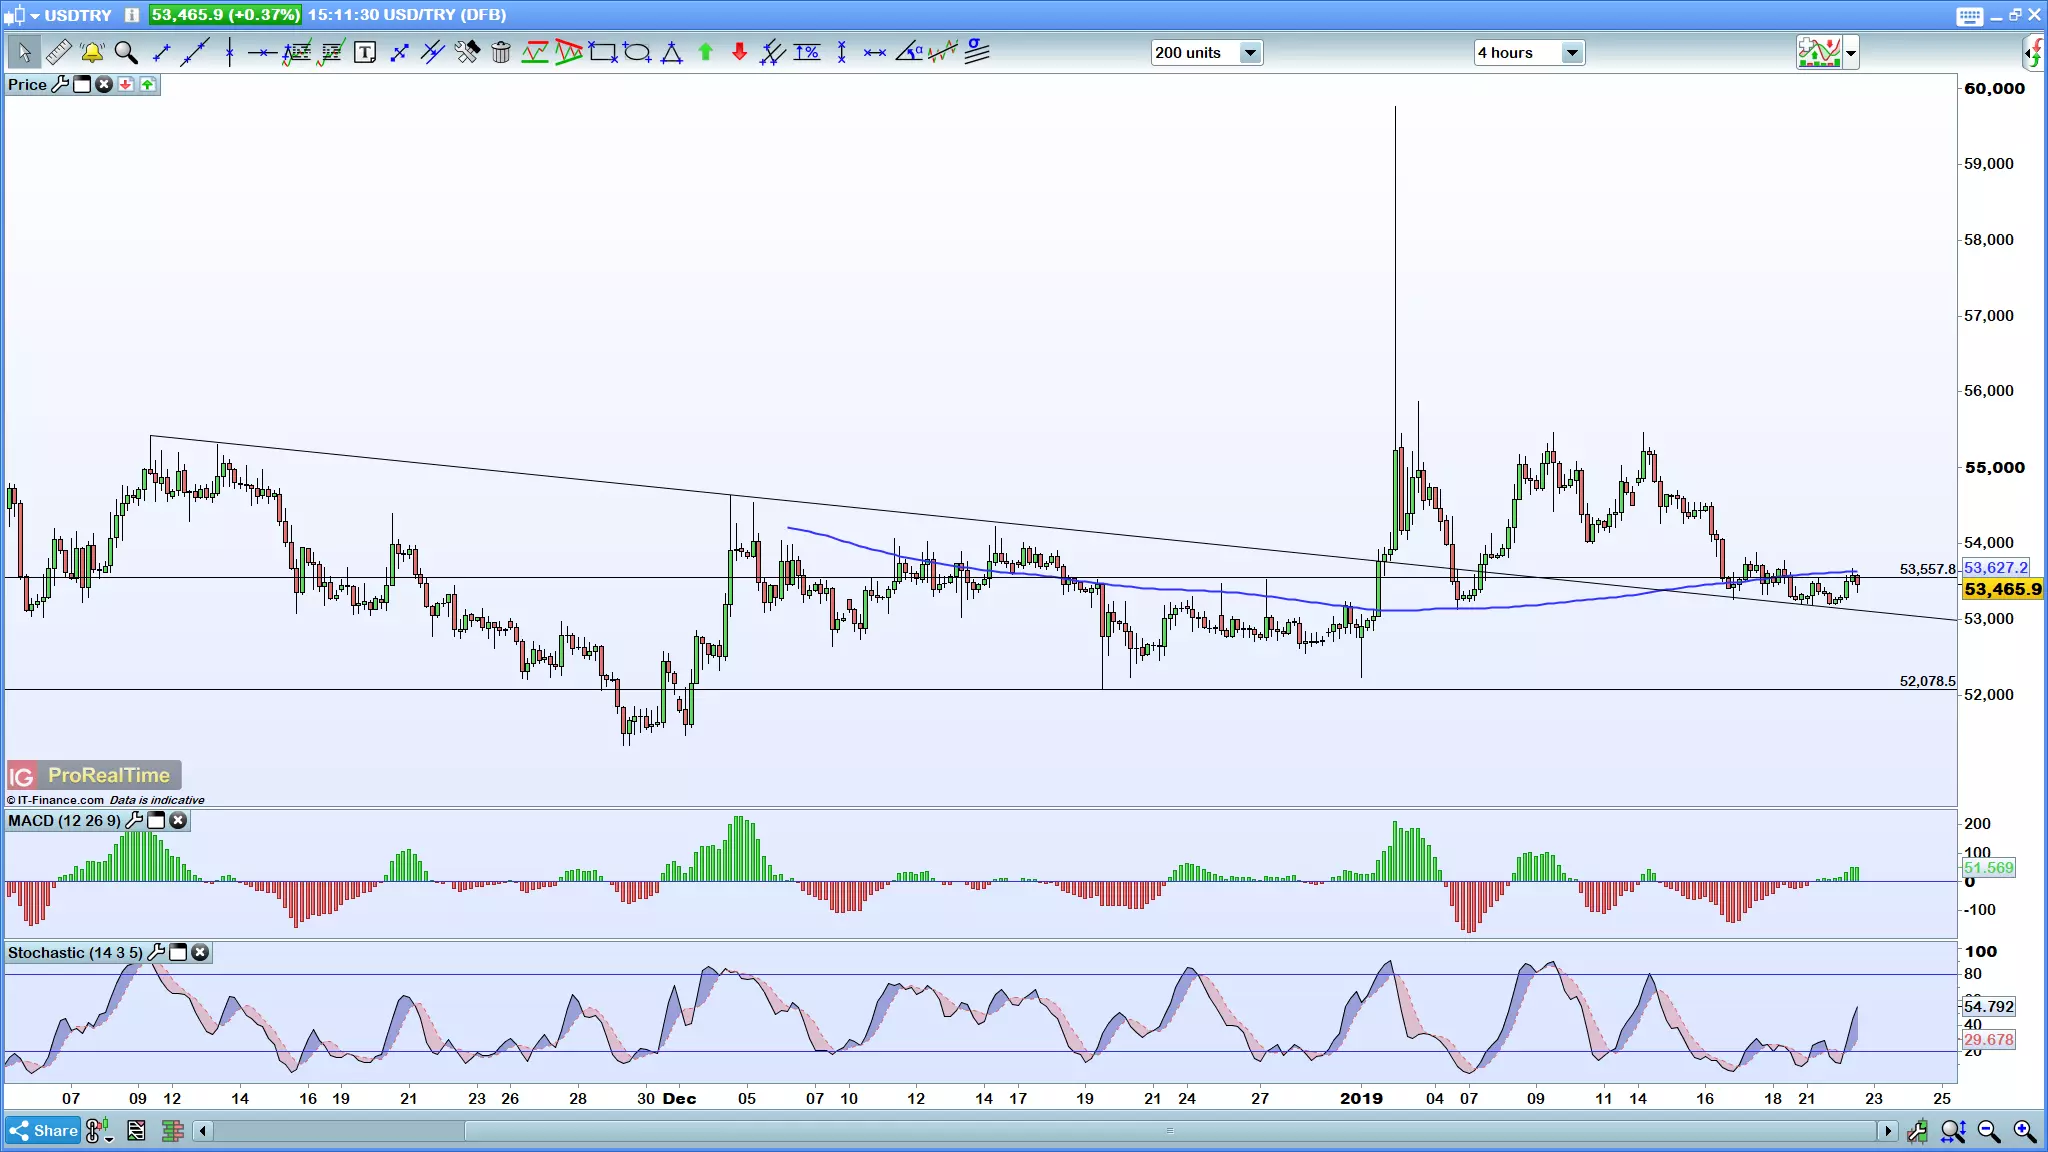 USD/TRY 4 hour chart